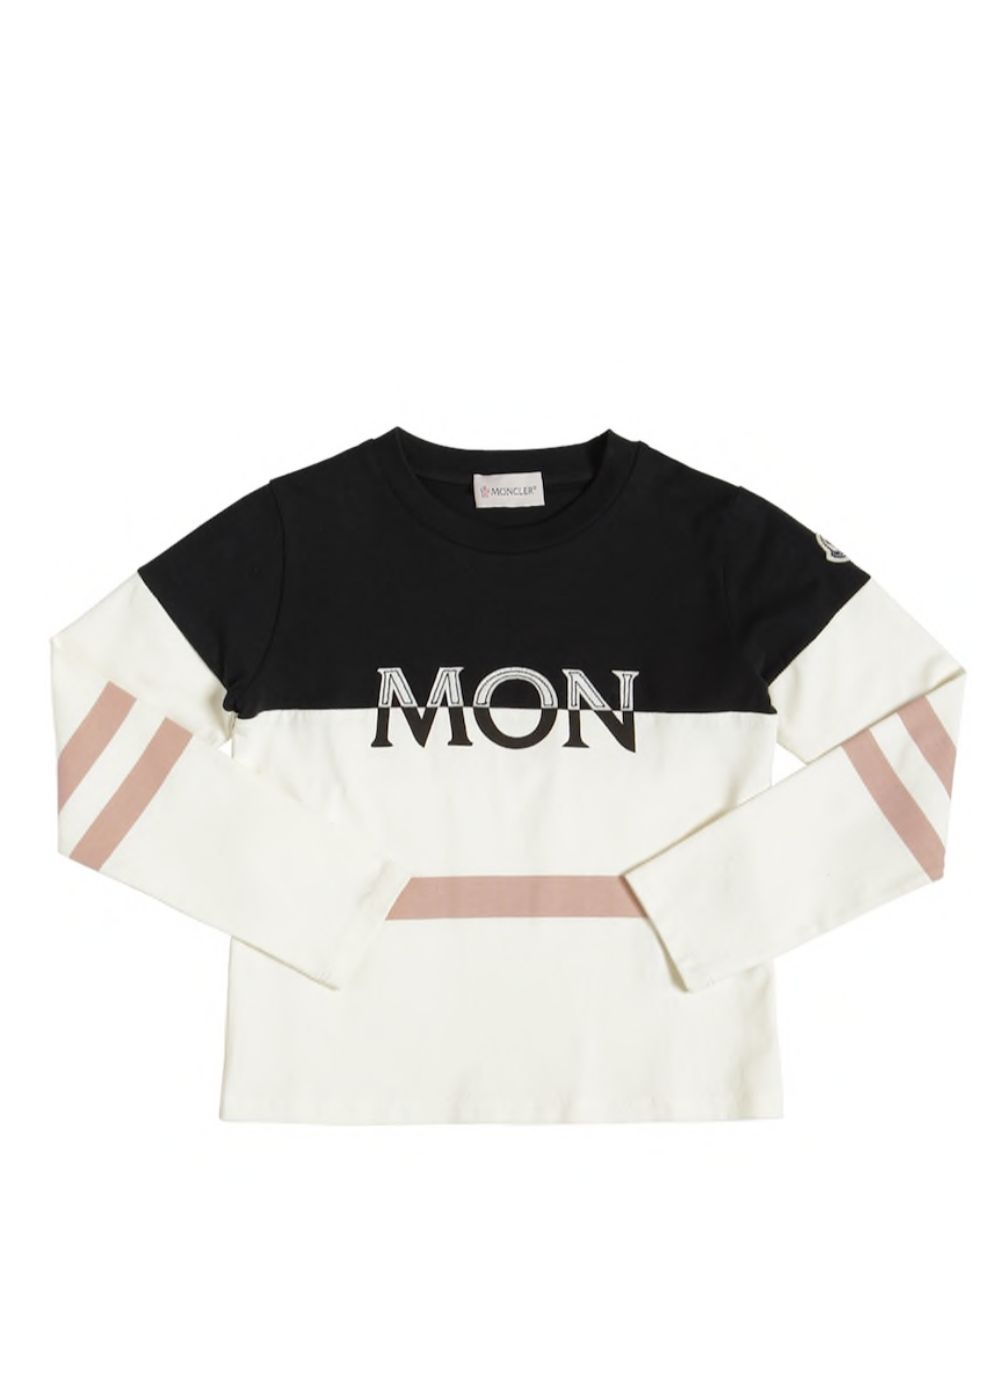 Featured image for “MONCLER T-SHIRT MULTICOLOR”